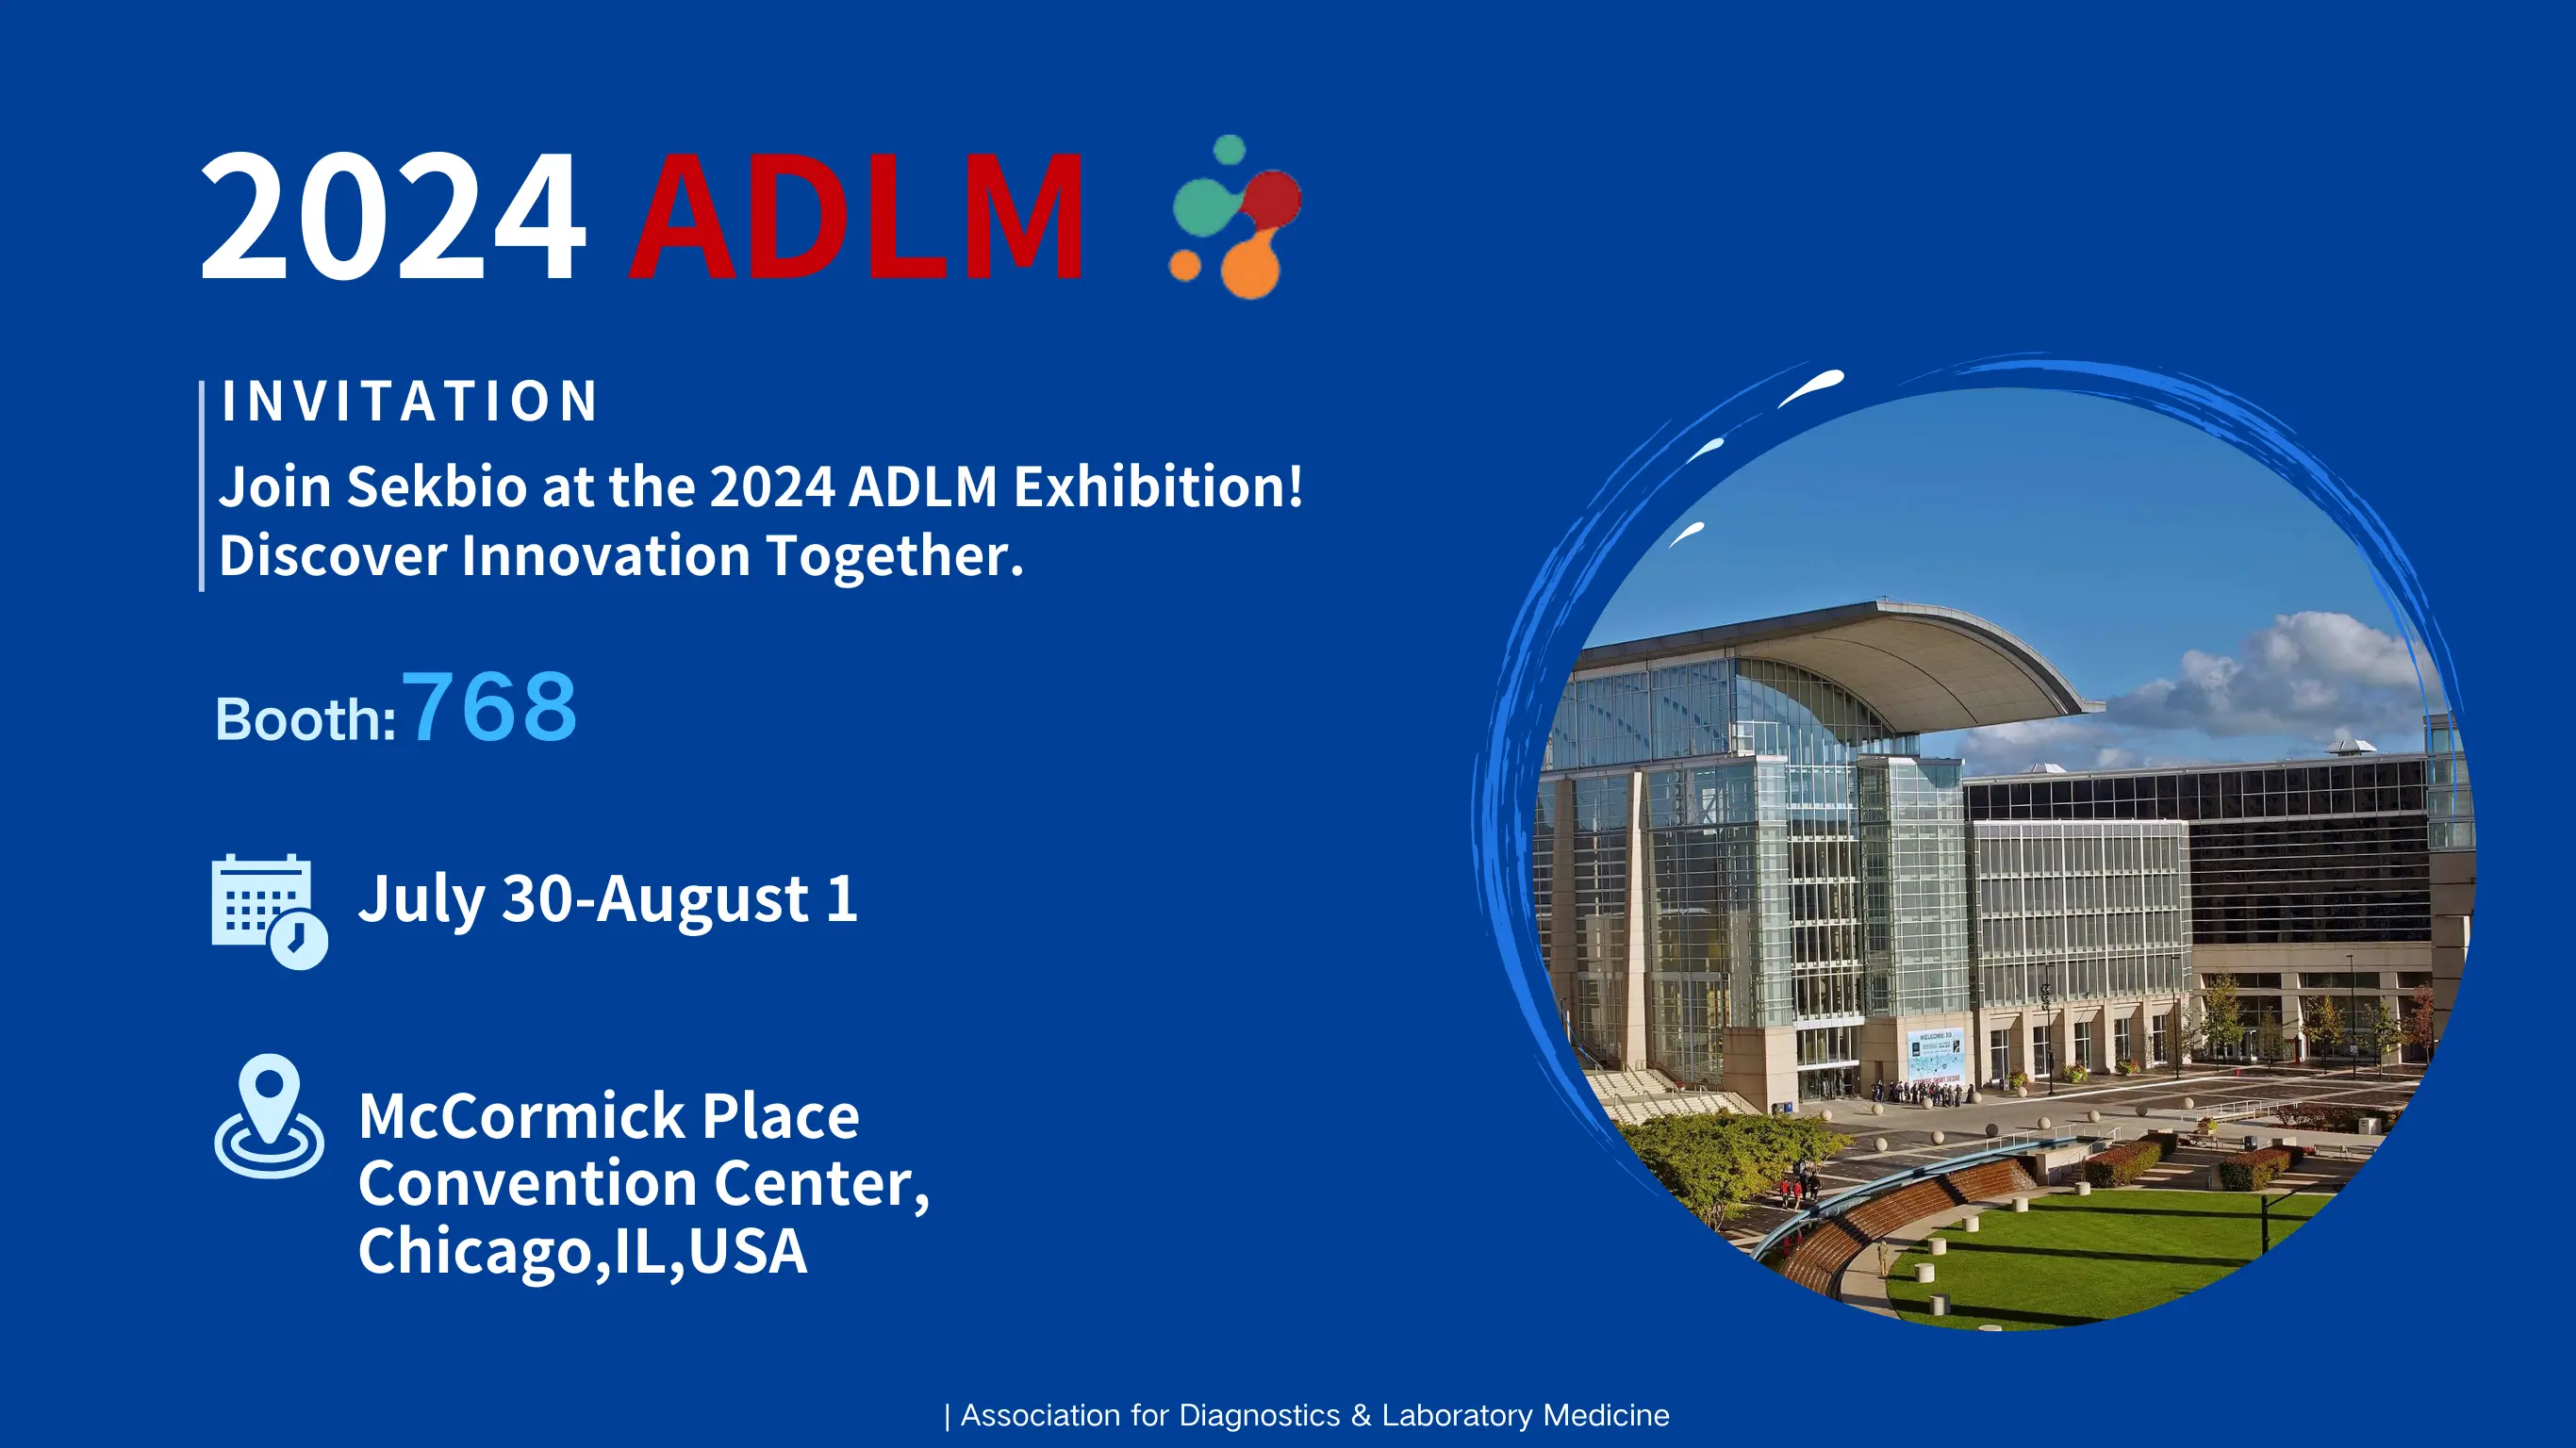 Join Sekbio at the 2024 ADLM Exhibition!